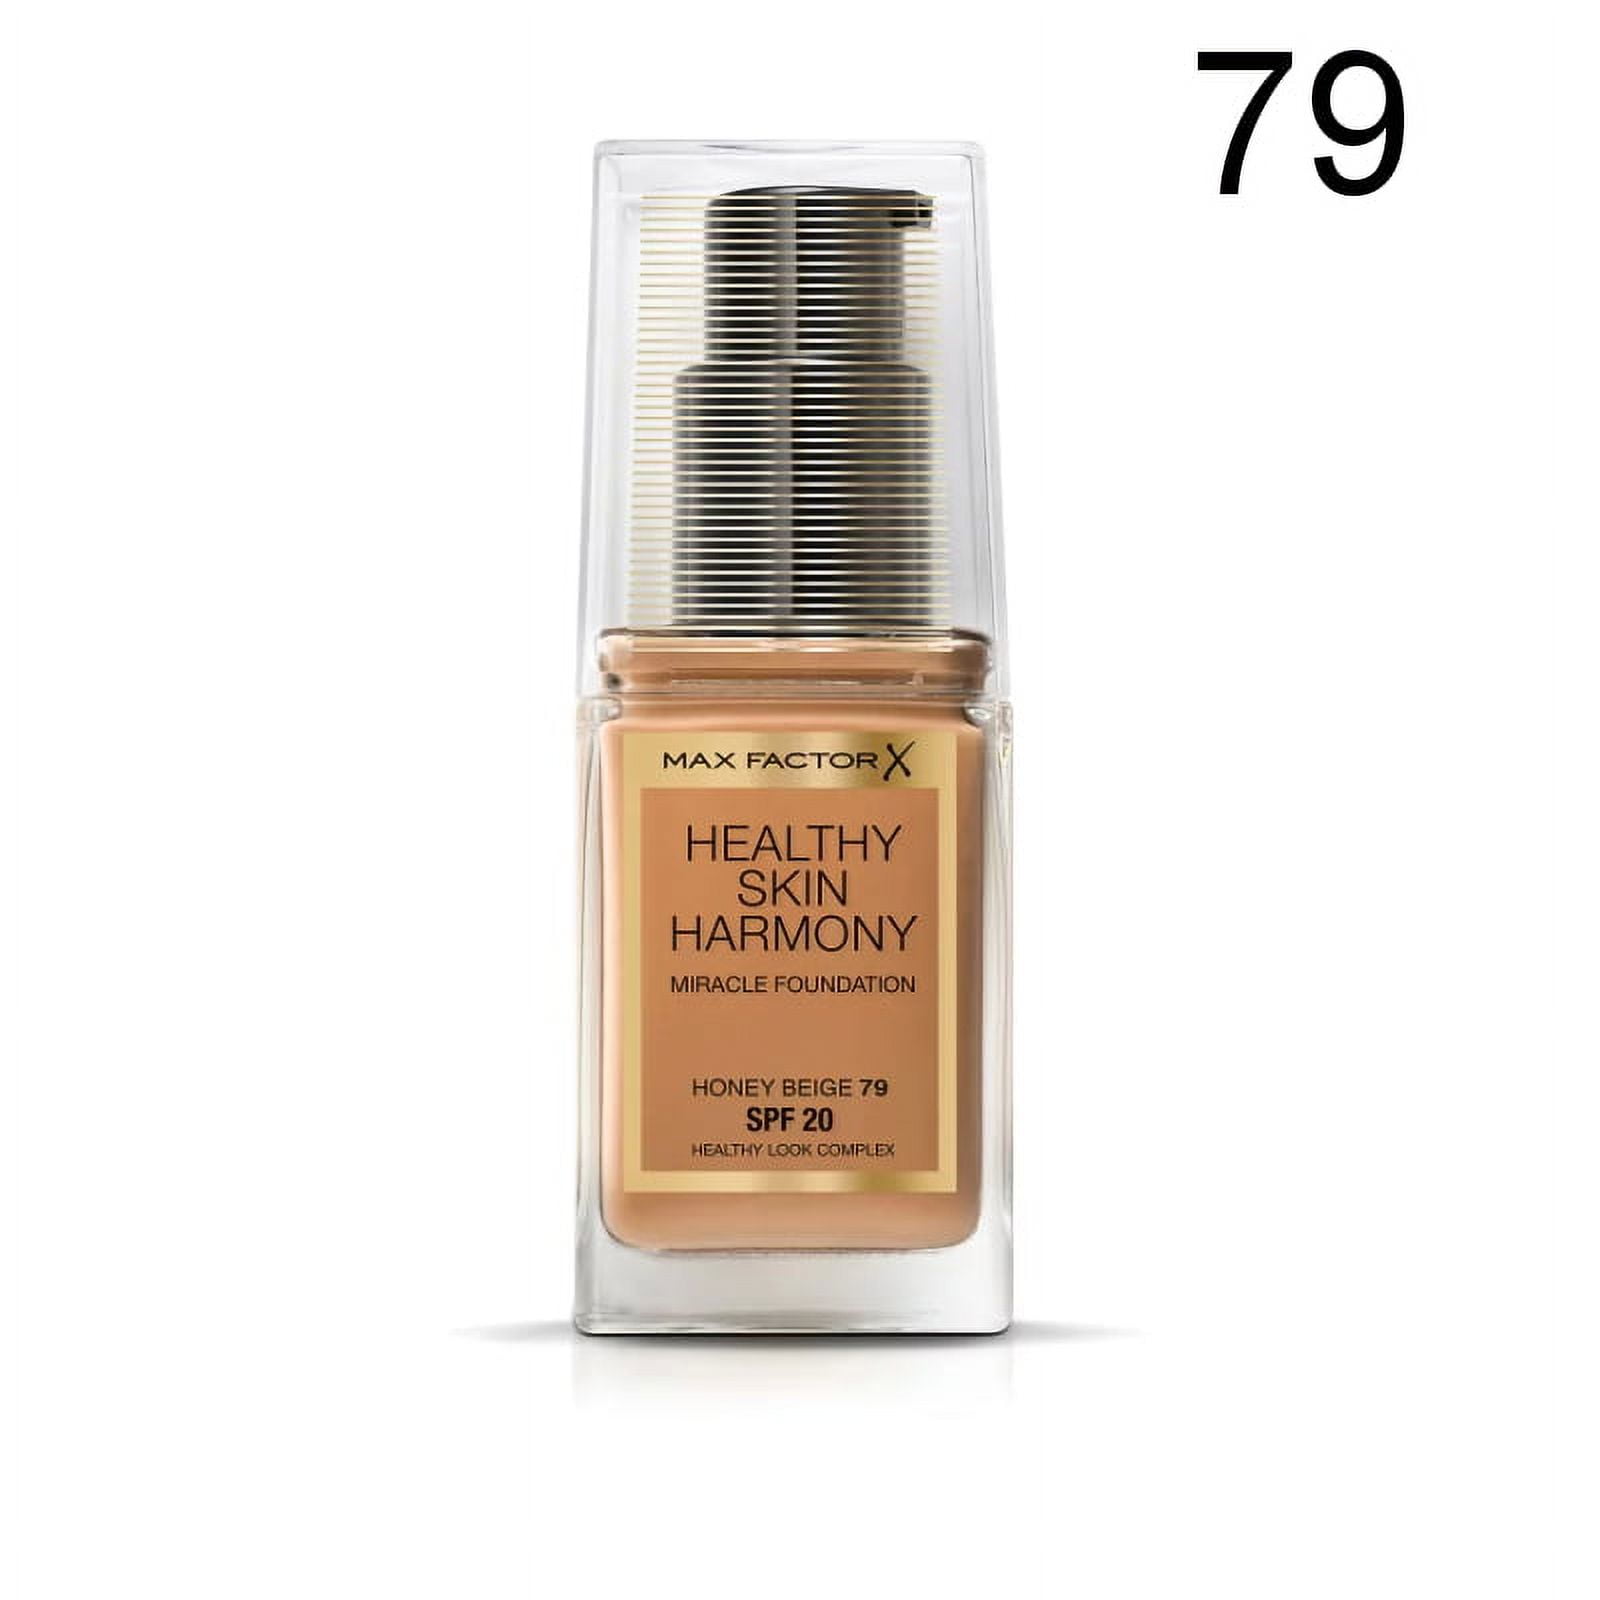 Skin Max 79 Miracle Honey Factor Healthy Harmony Beige Foundation -